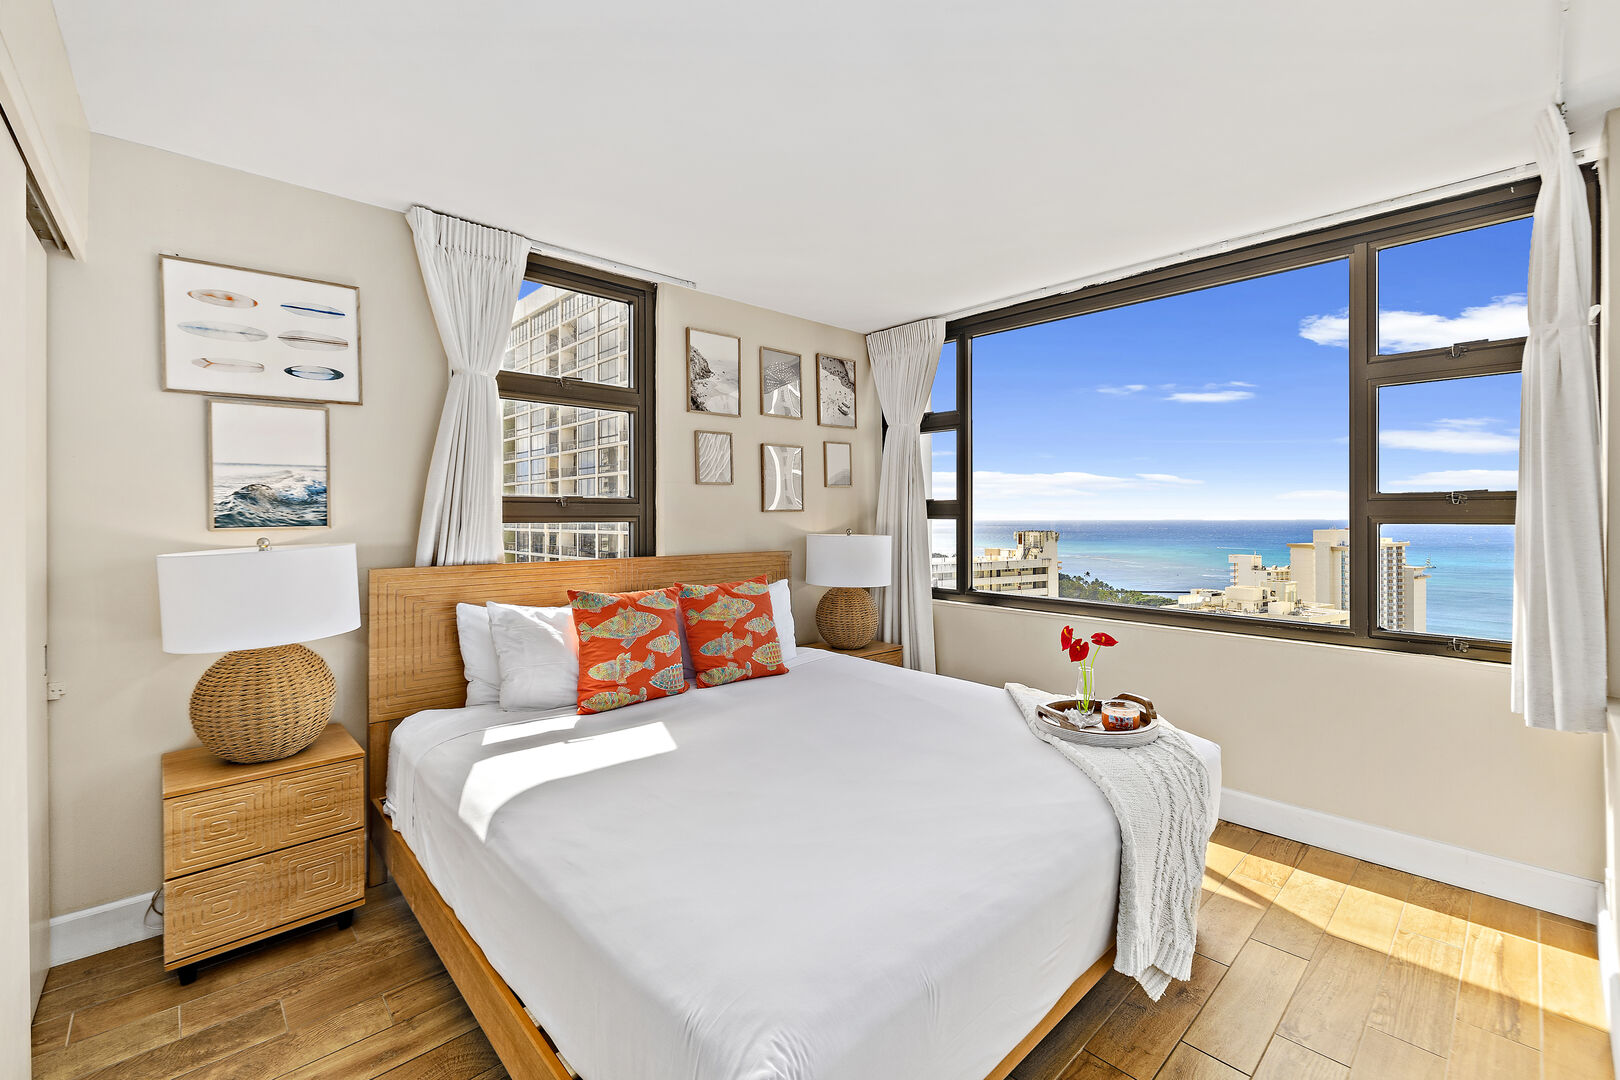 Relax in your bedroom with king size bed and enjoy the beautiful ocean views from your window!